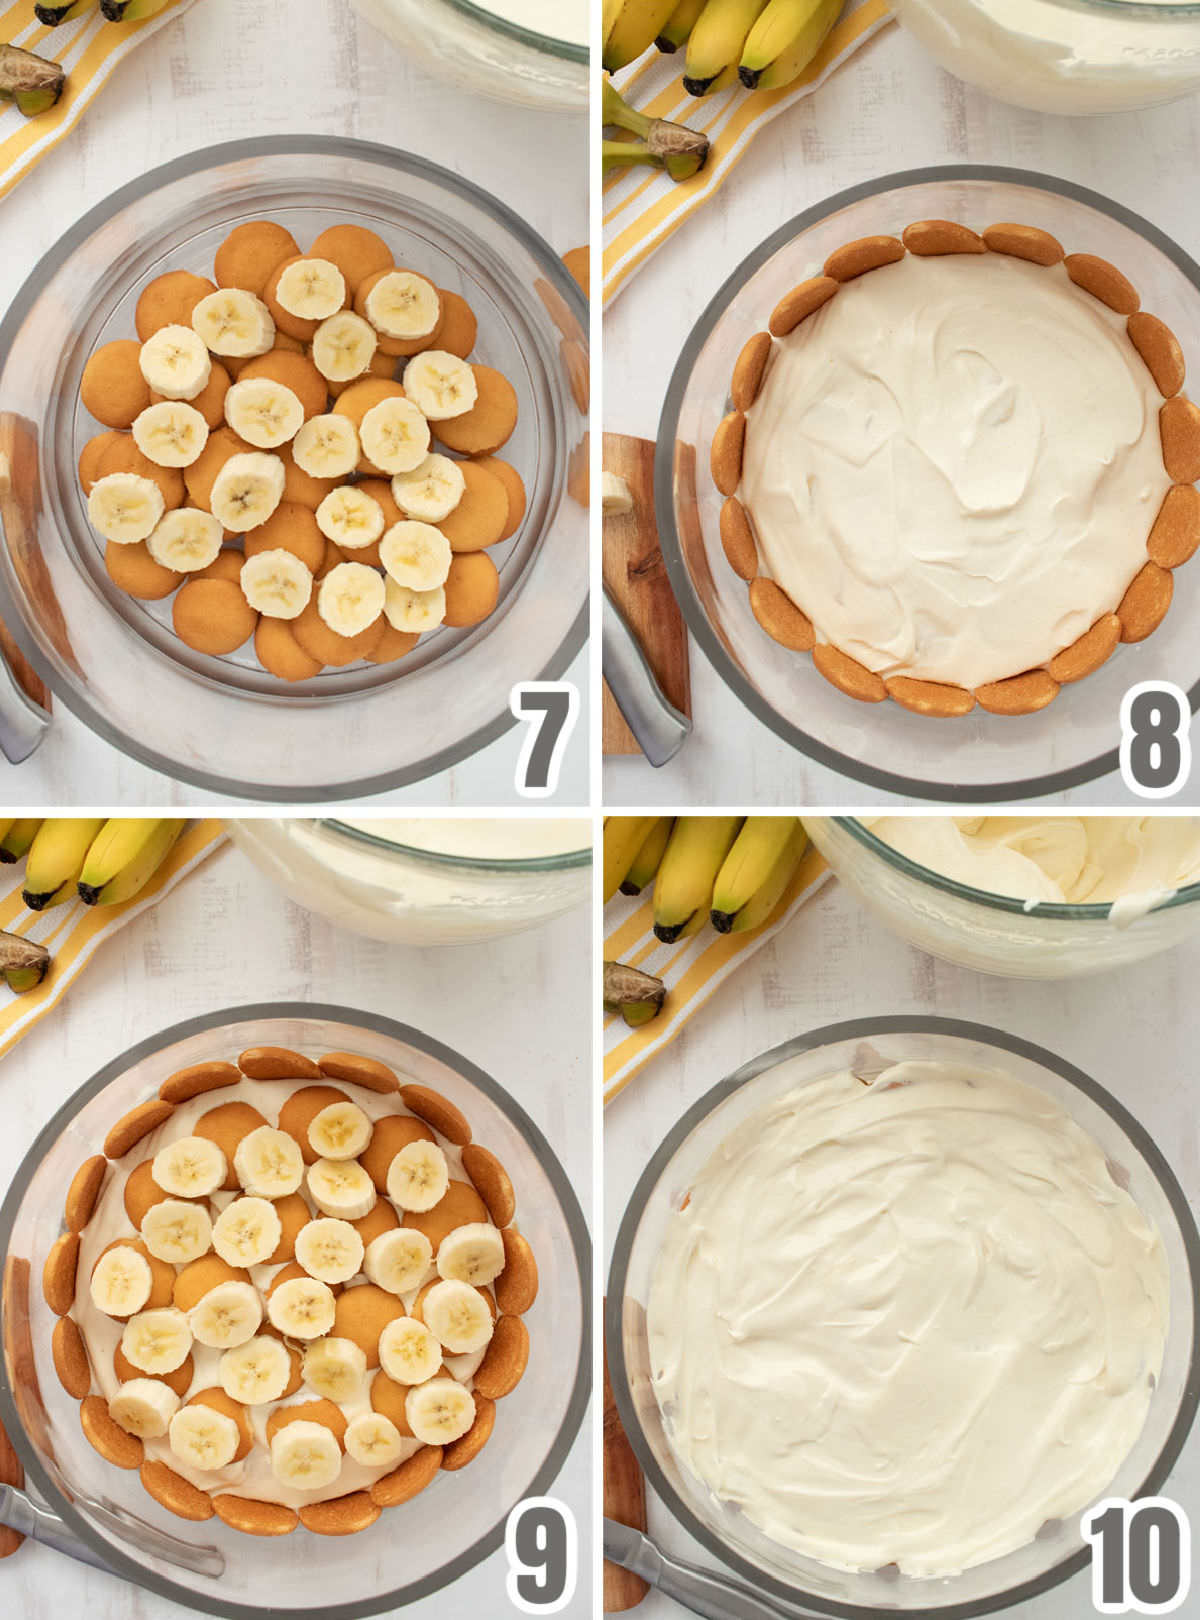 A collage images showing how to assemble the first two layers of the Banana dessert.